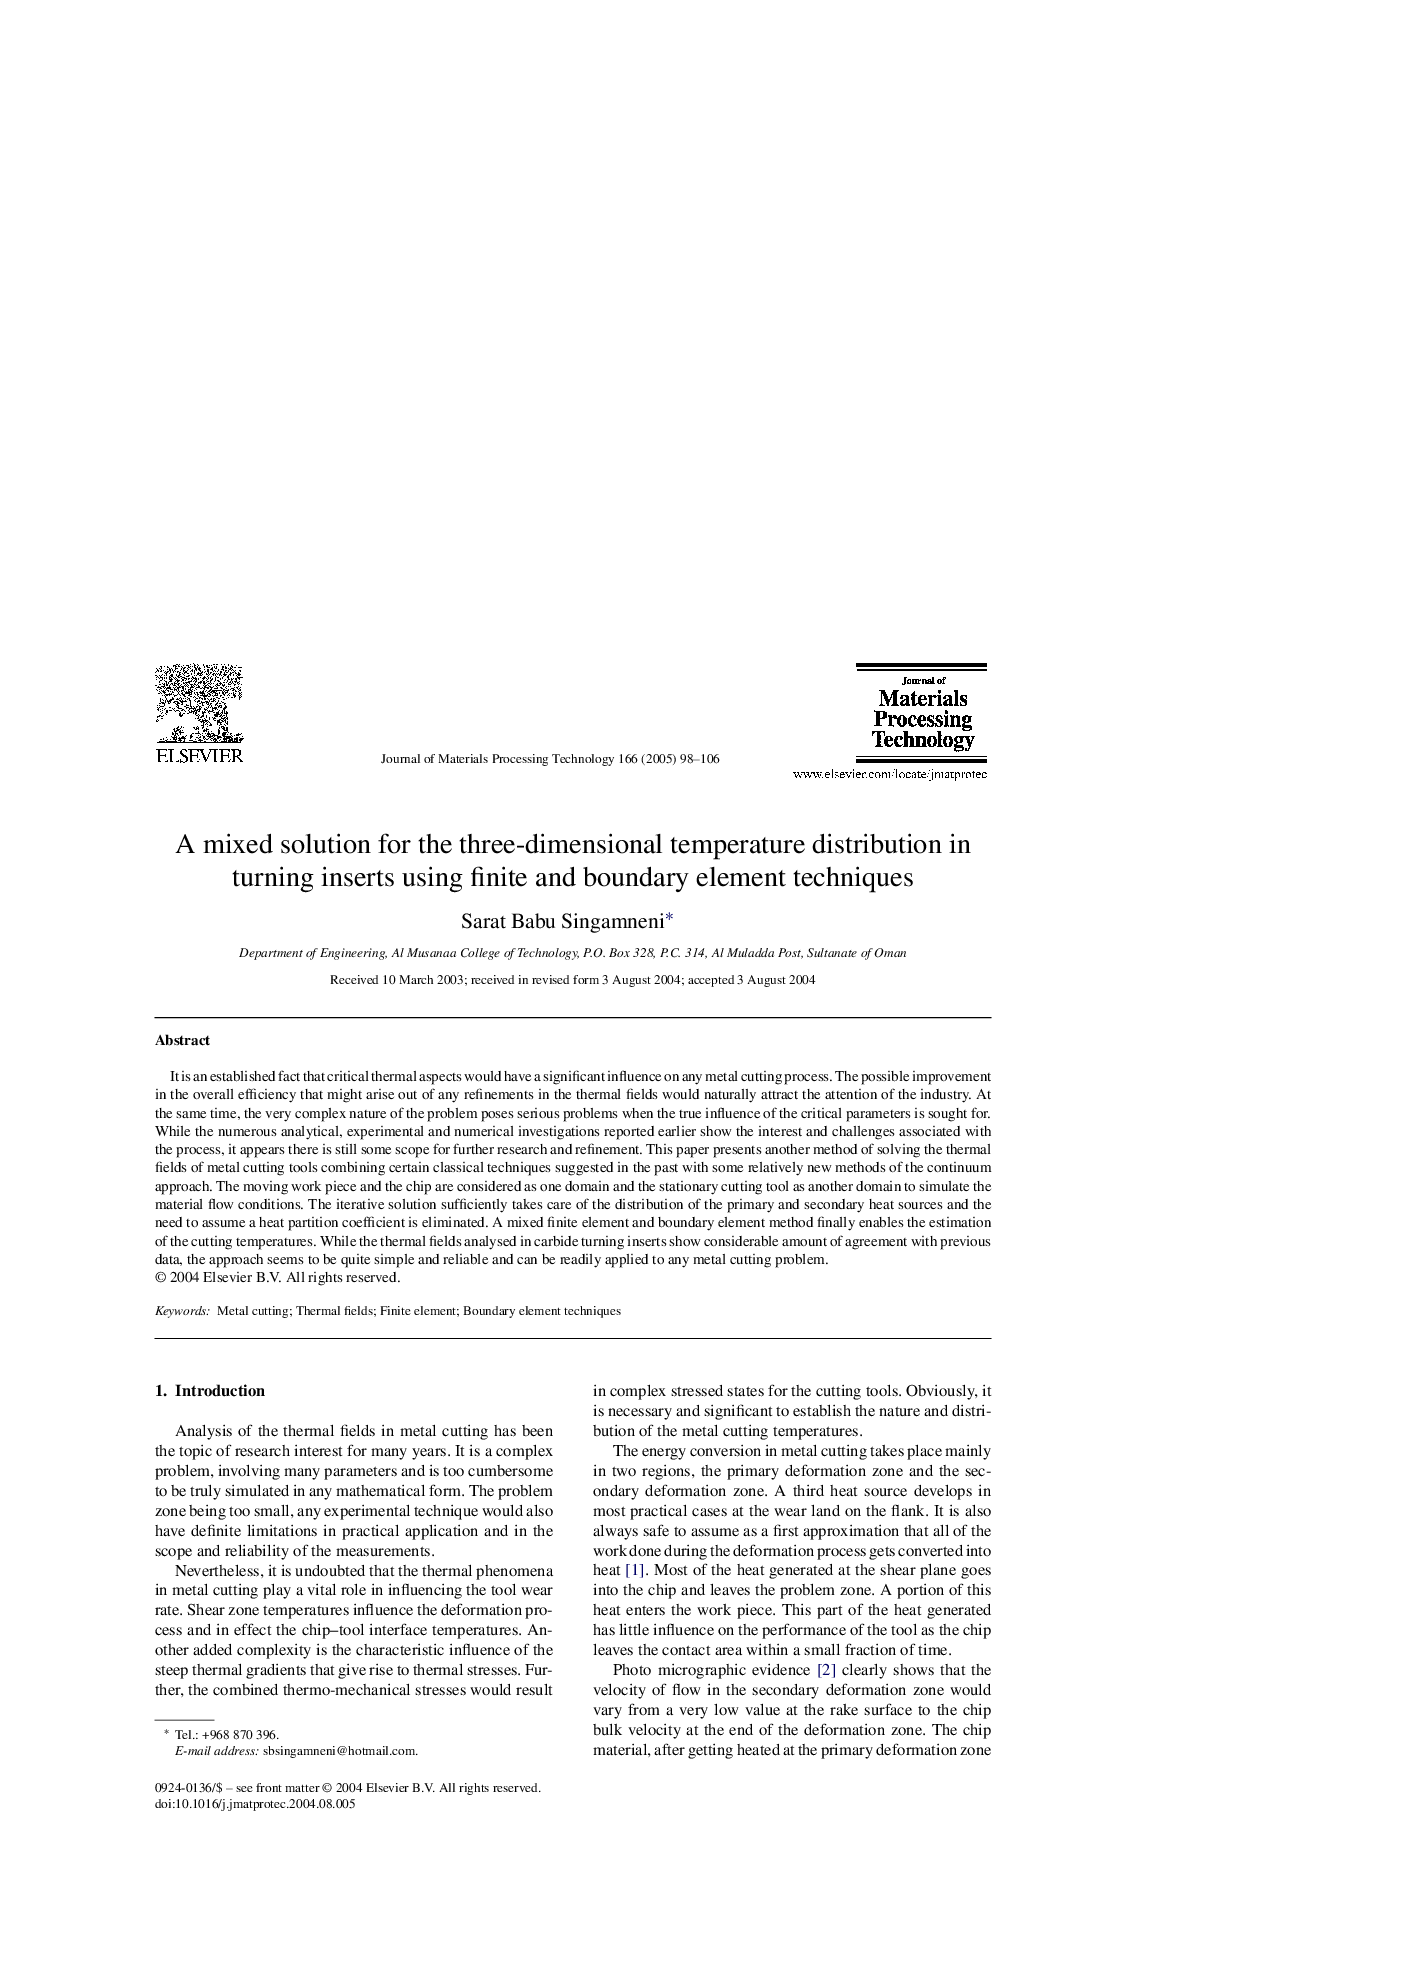 A mixed solution for the three-dimensional temperature distribution in turning inserts using finite and boundary element techniques